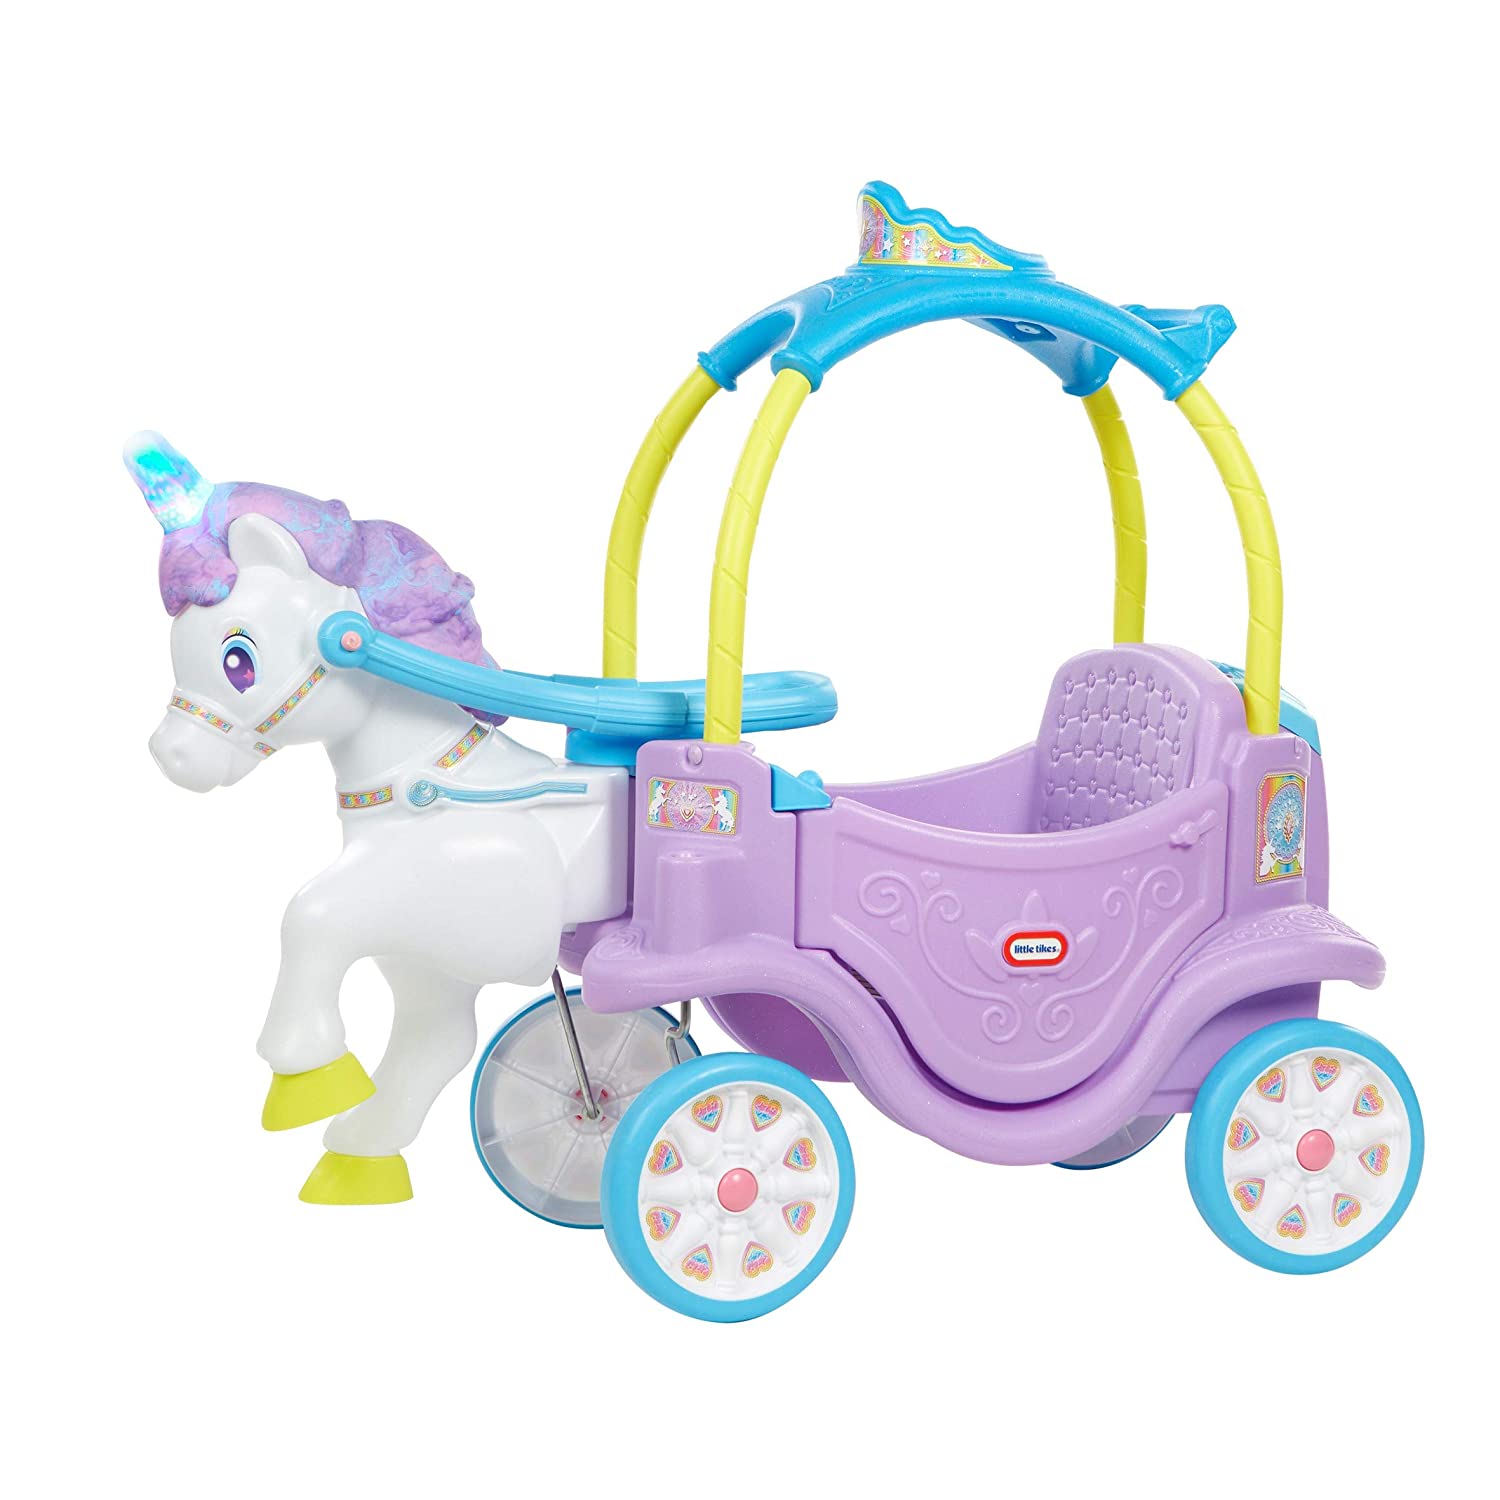 23 Best Unicorn Toys and Gifts for Girls 2023 - Review & Buying Guide 16